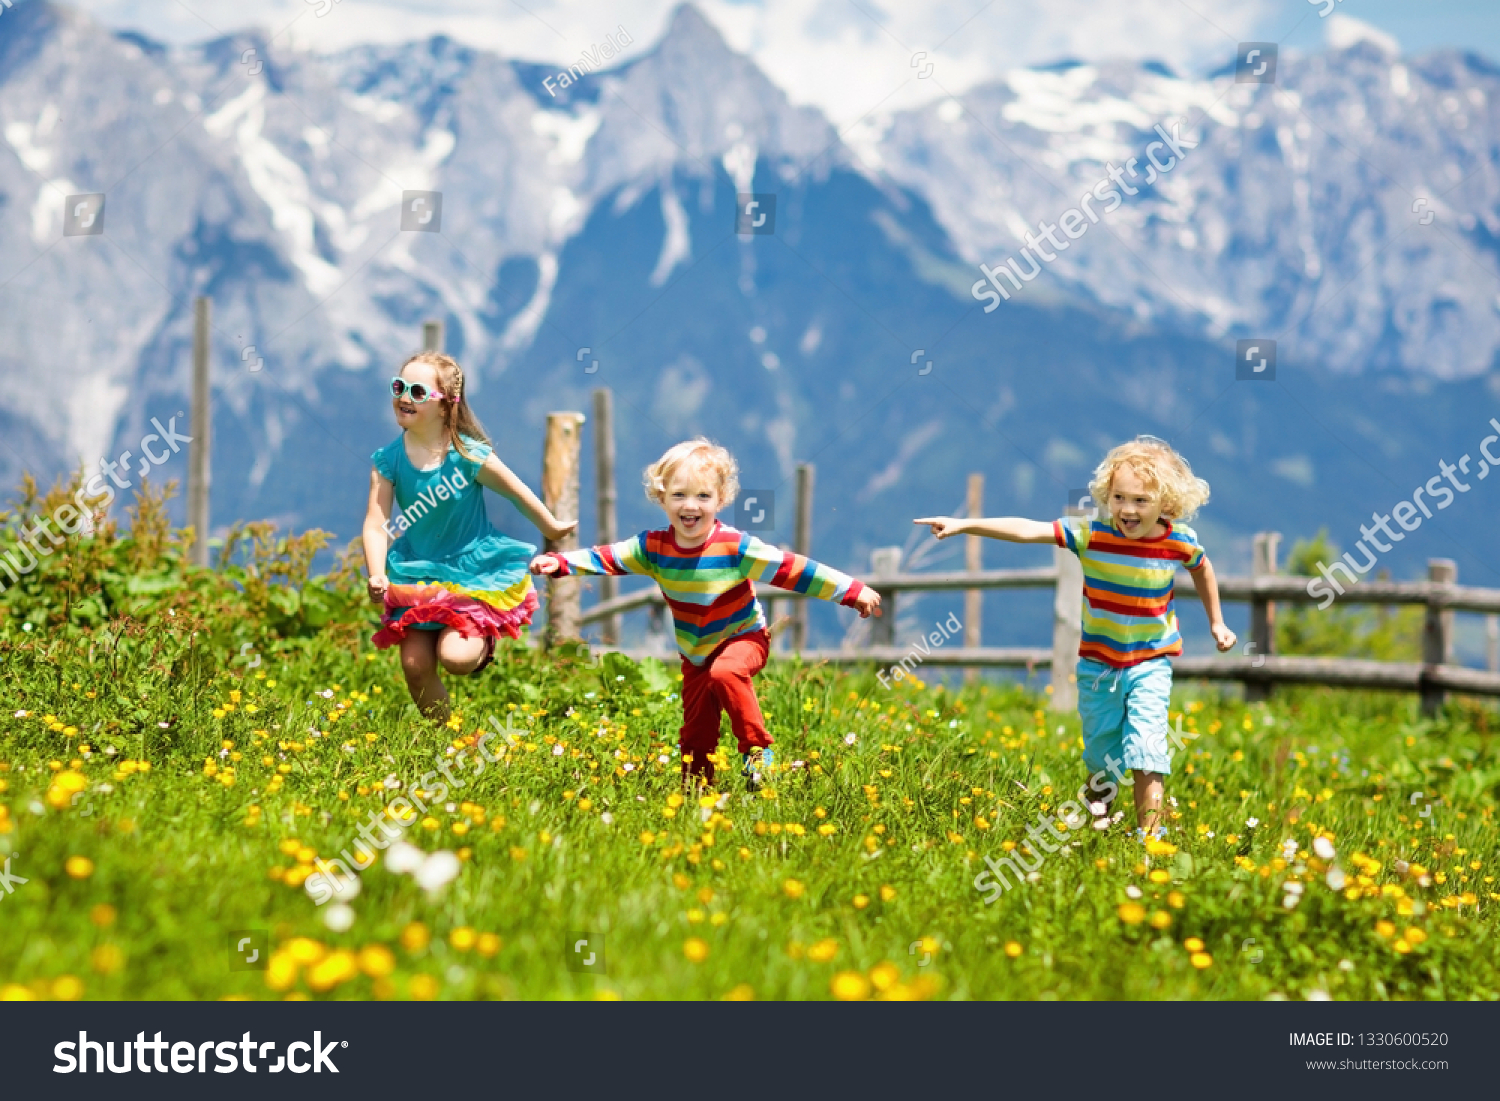 Children hiking in Alps mountains. Kids run at snow covered mountain in Austria. Spring family vacation. Little boy and girl on hike trail in blooming alpine meadow. Outdoor fun and healthy activity

 #1330600520